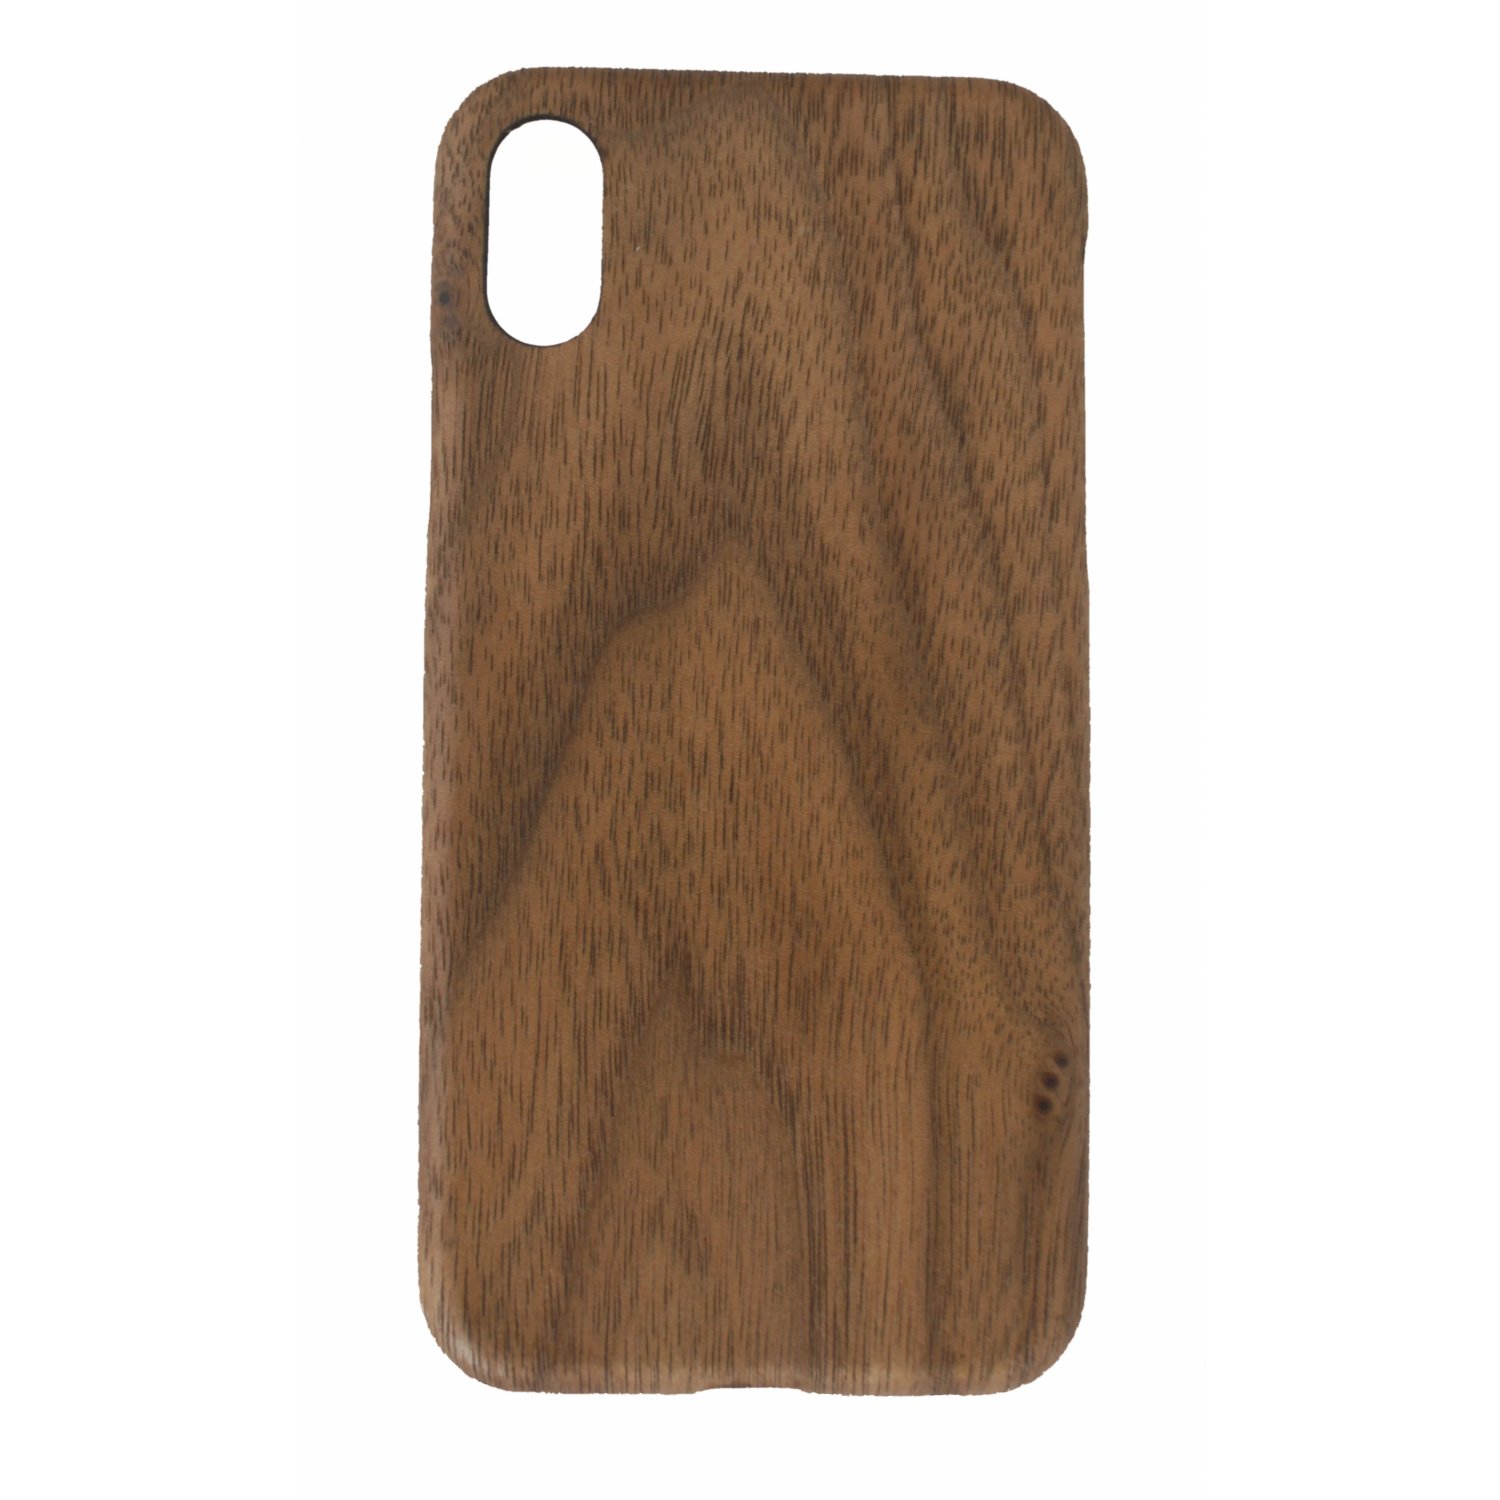 extra thin and featherlight walnut case for Iphone X